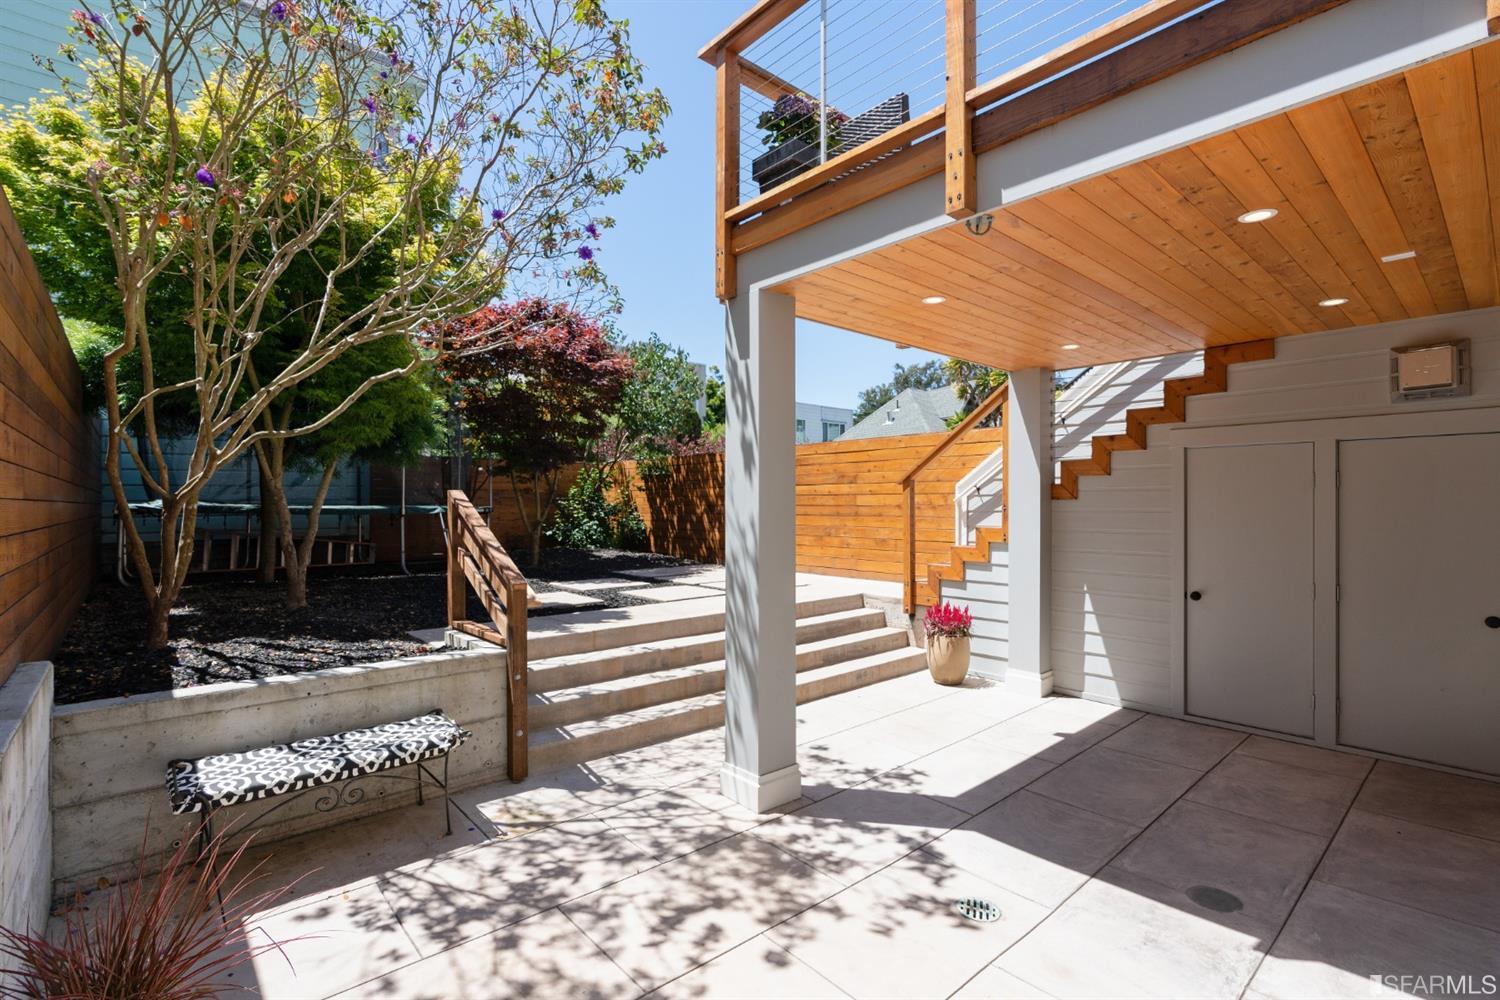 Property Photo: A sunny view of the outdoor patio and yard